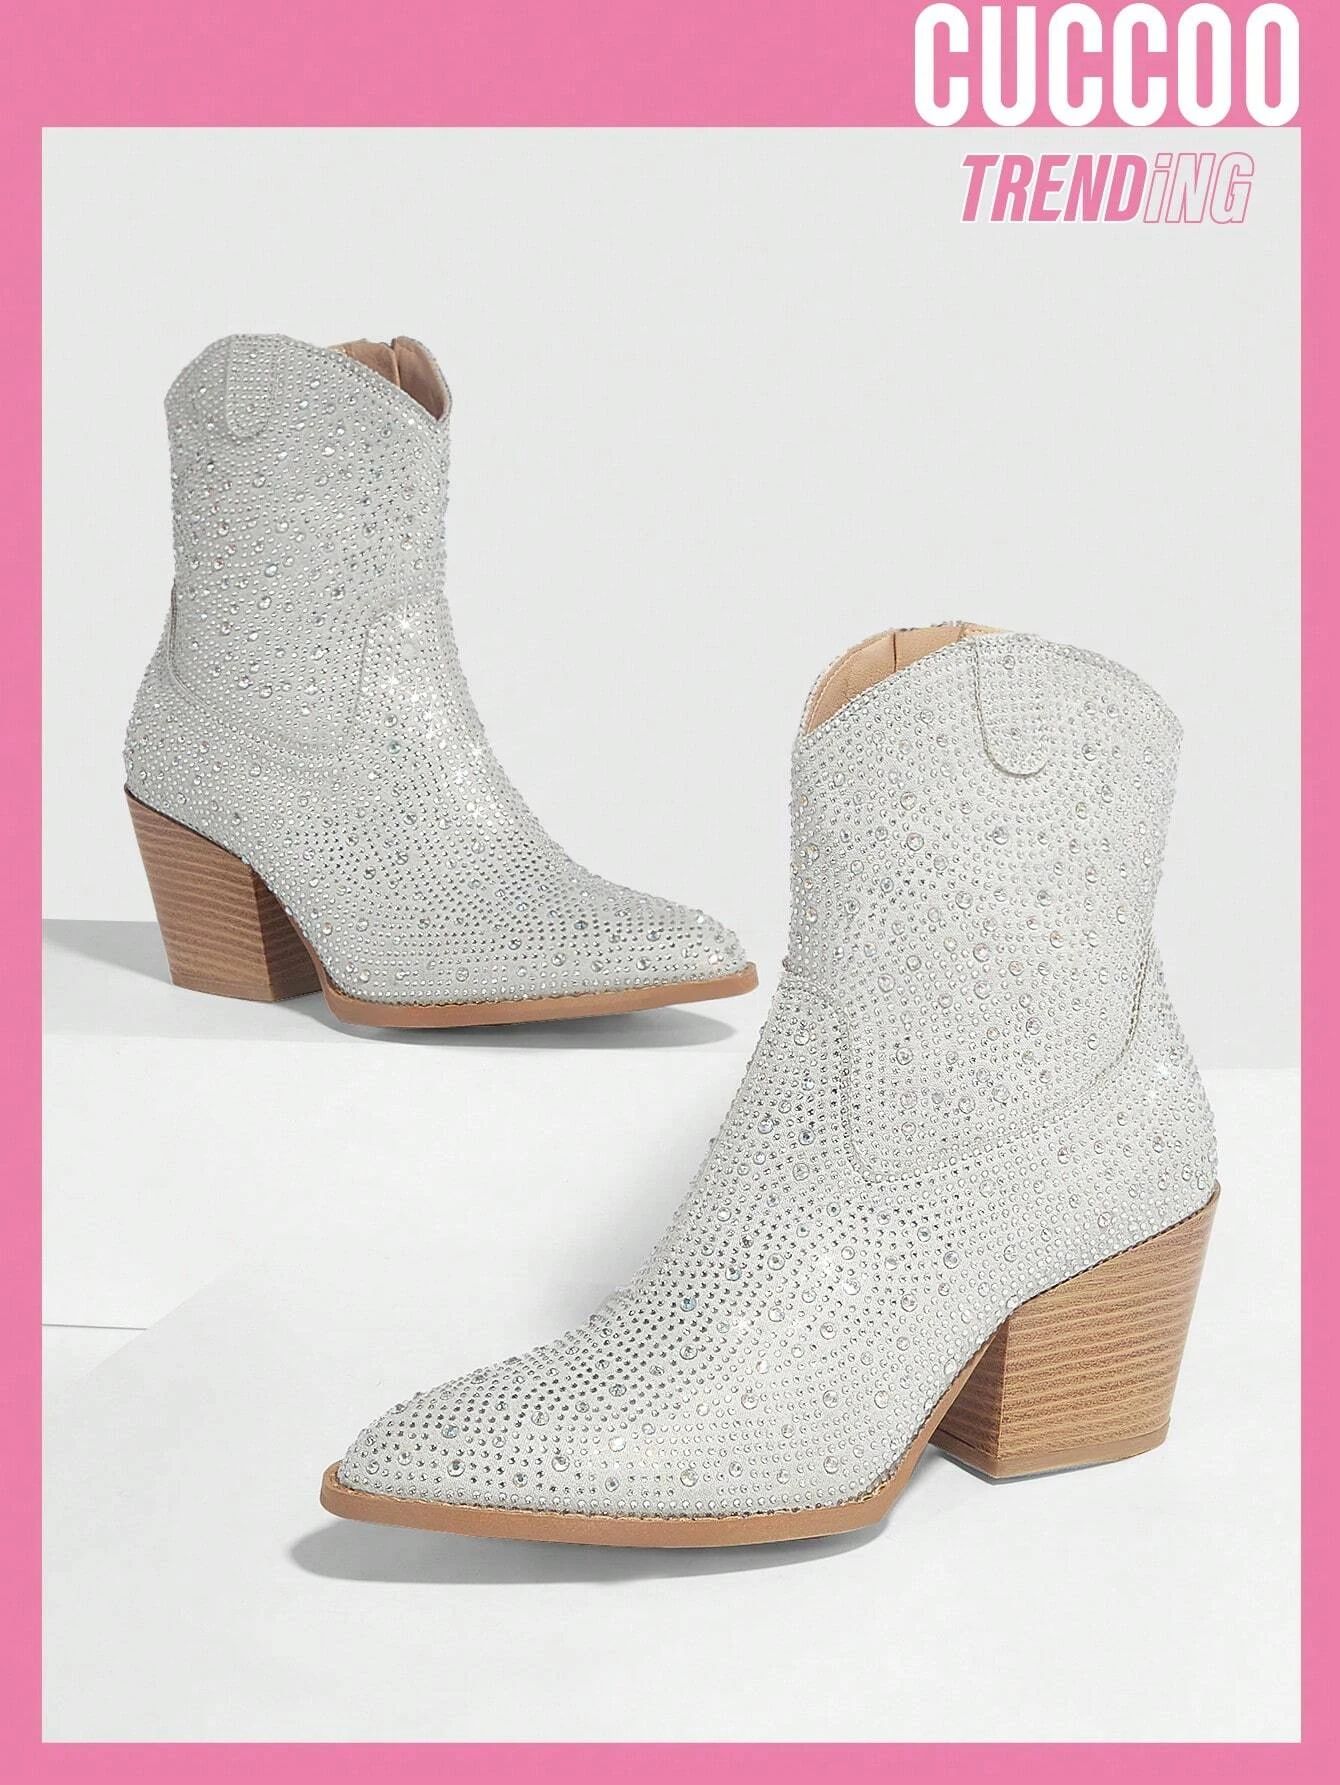 Cuccoo Party Collection Rhinestone Decor Chunky Heeled Western Boots | SHEIN